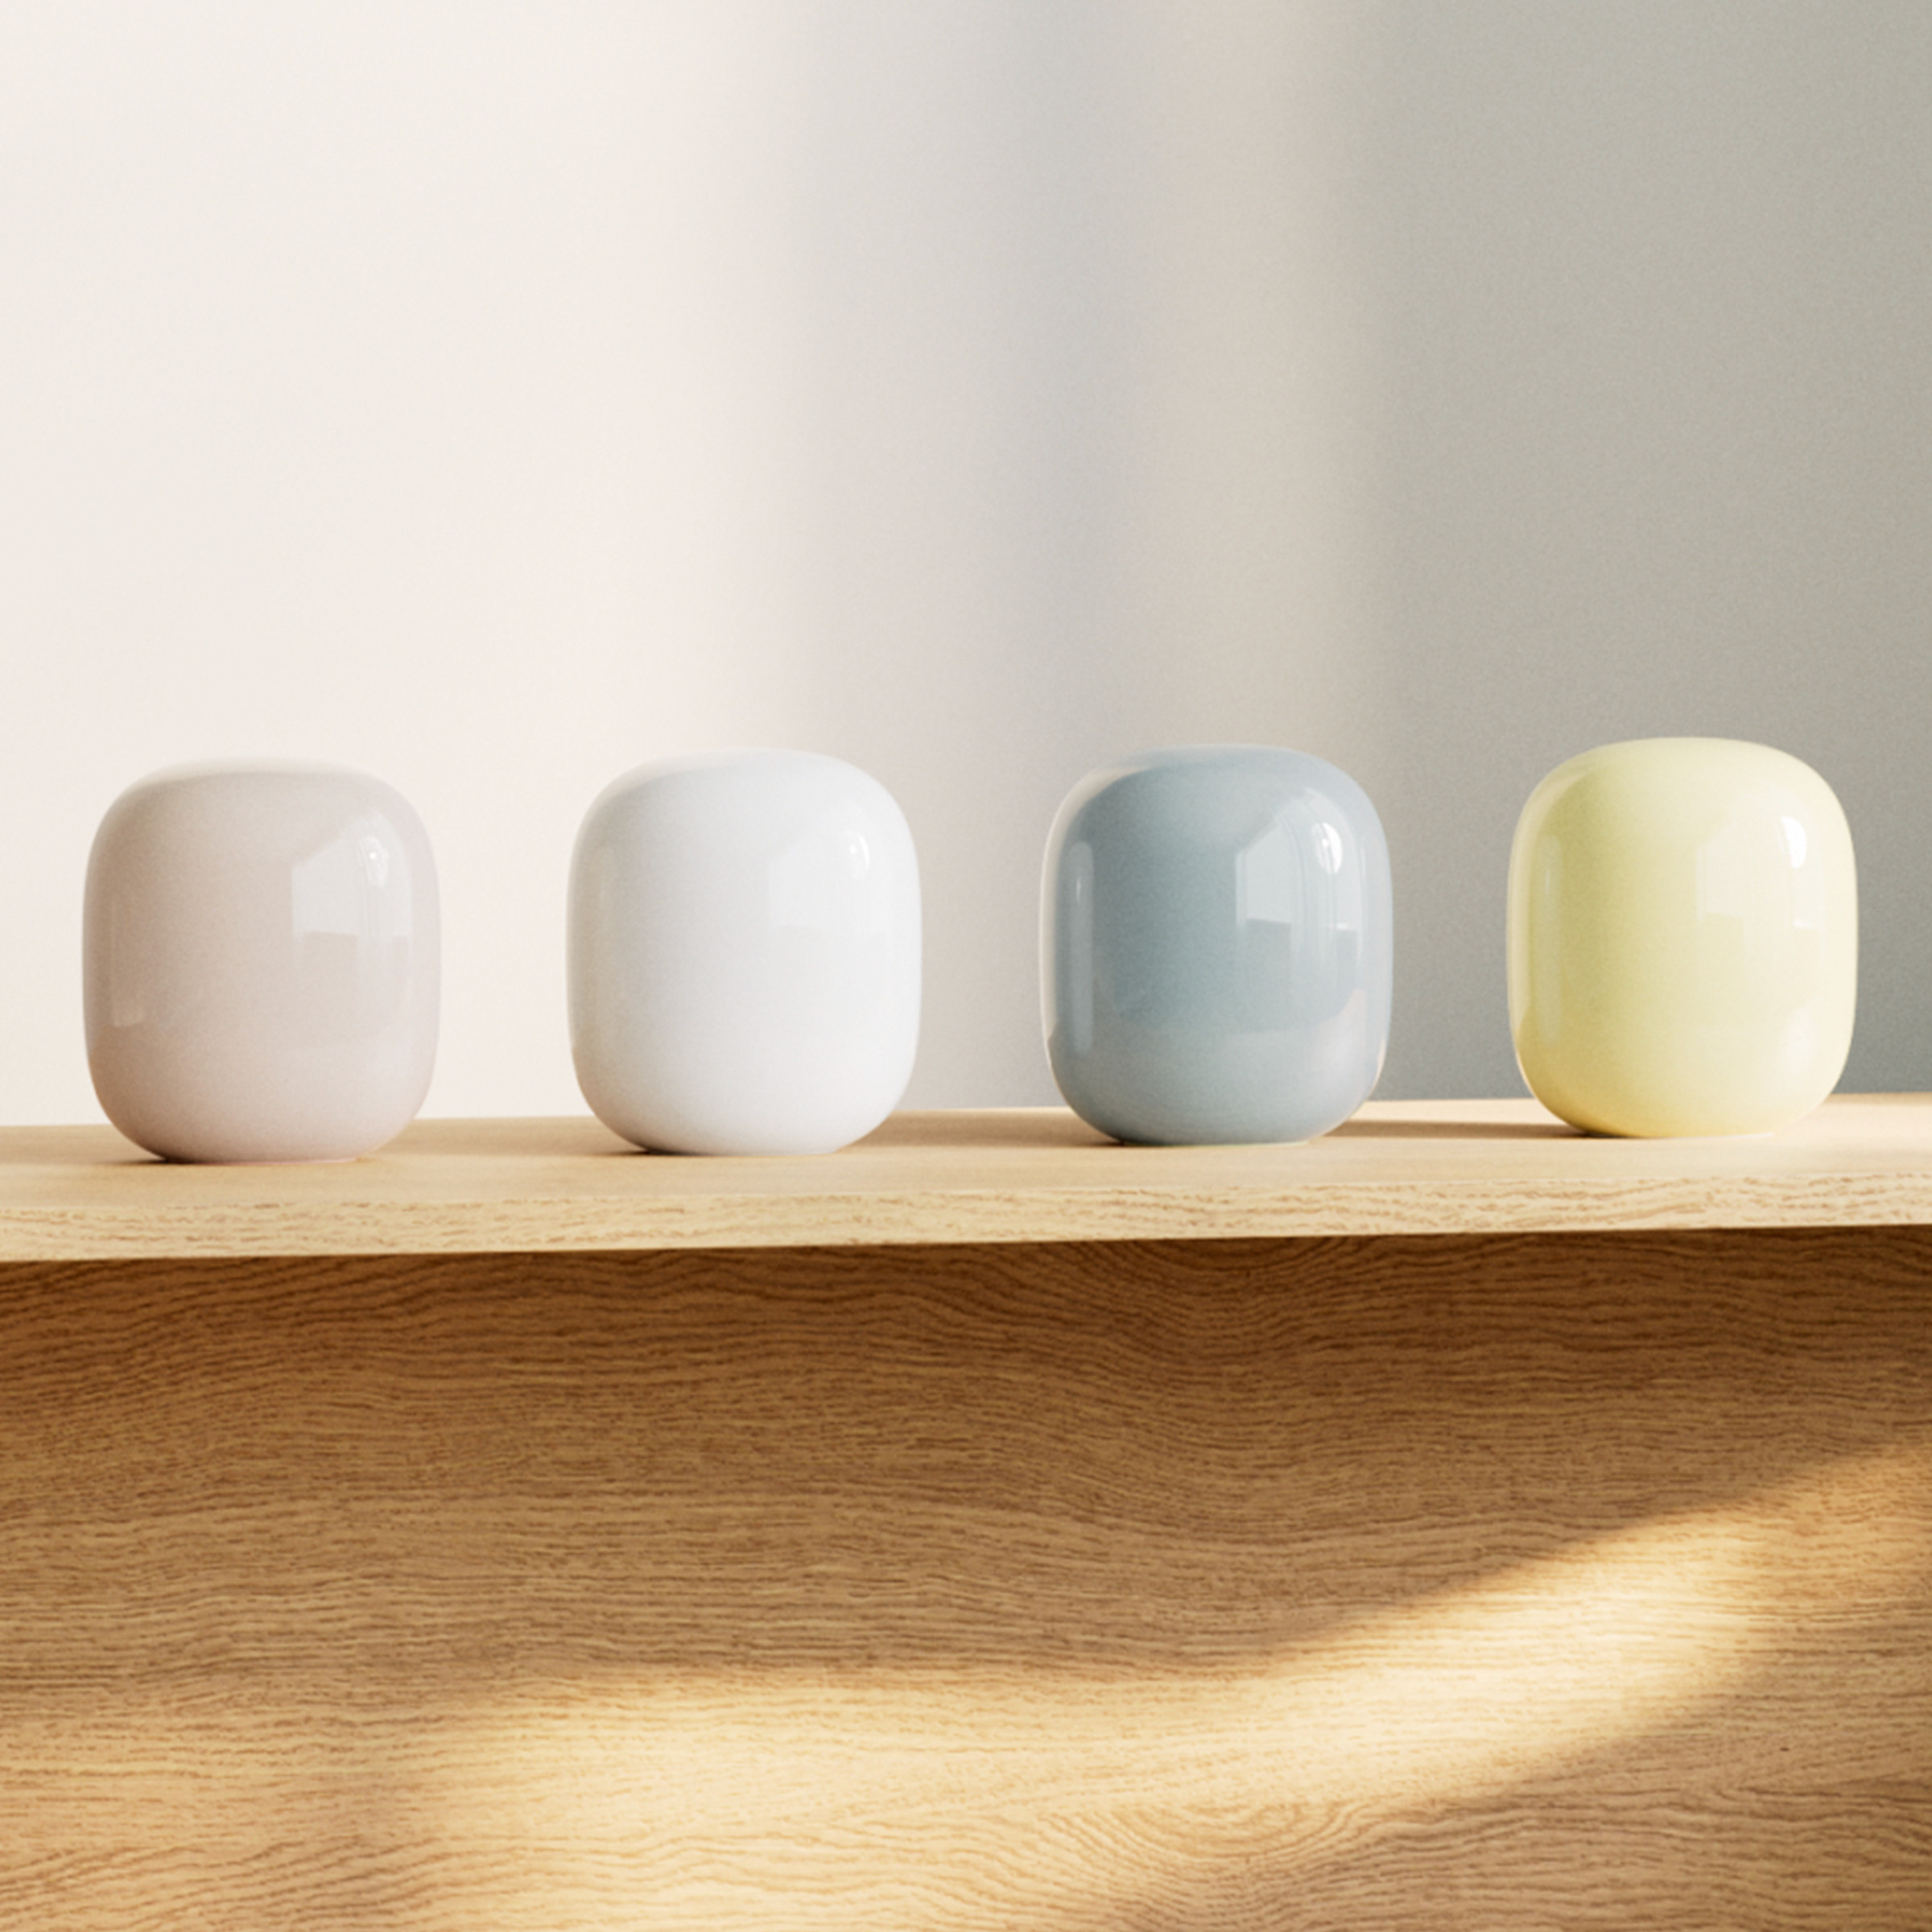 Photo of four Nest Wifi Pro routers on a wood table. One is pink, one is white, one is blue, and one is yellow. They are glossy and reflective rounded rectangles.